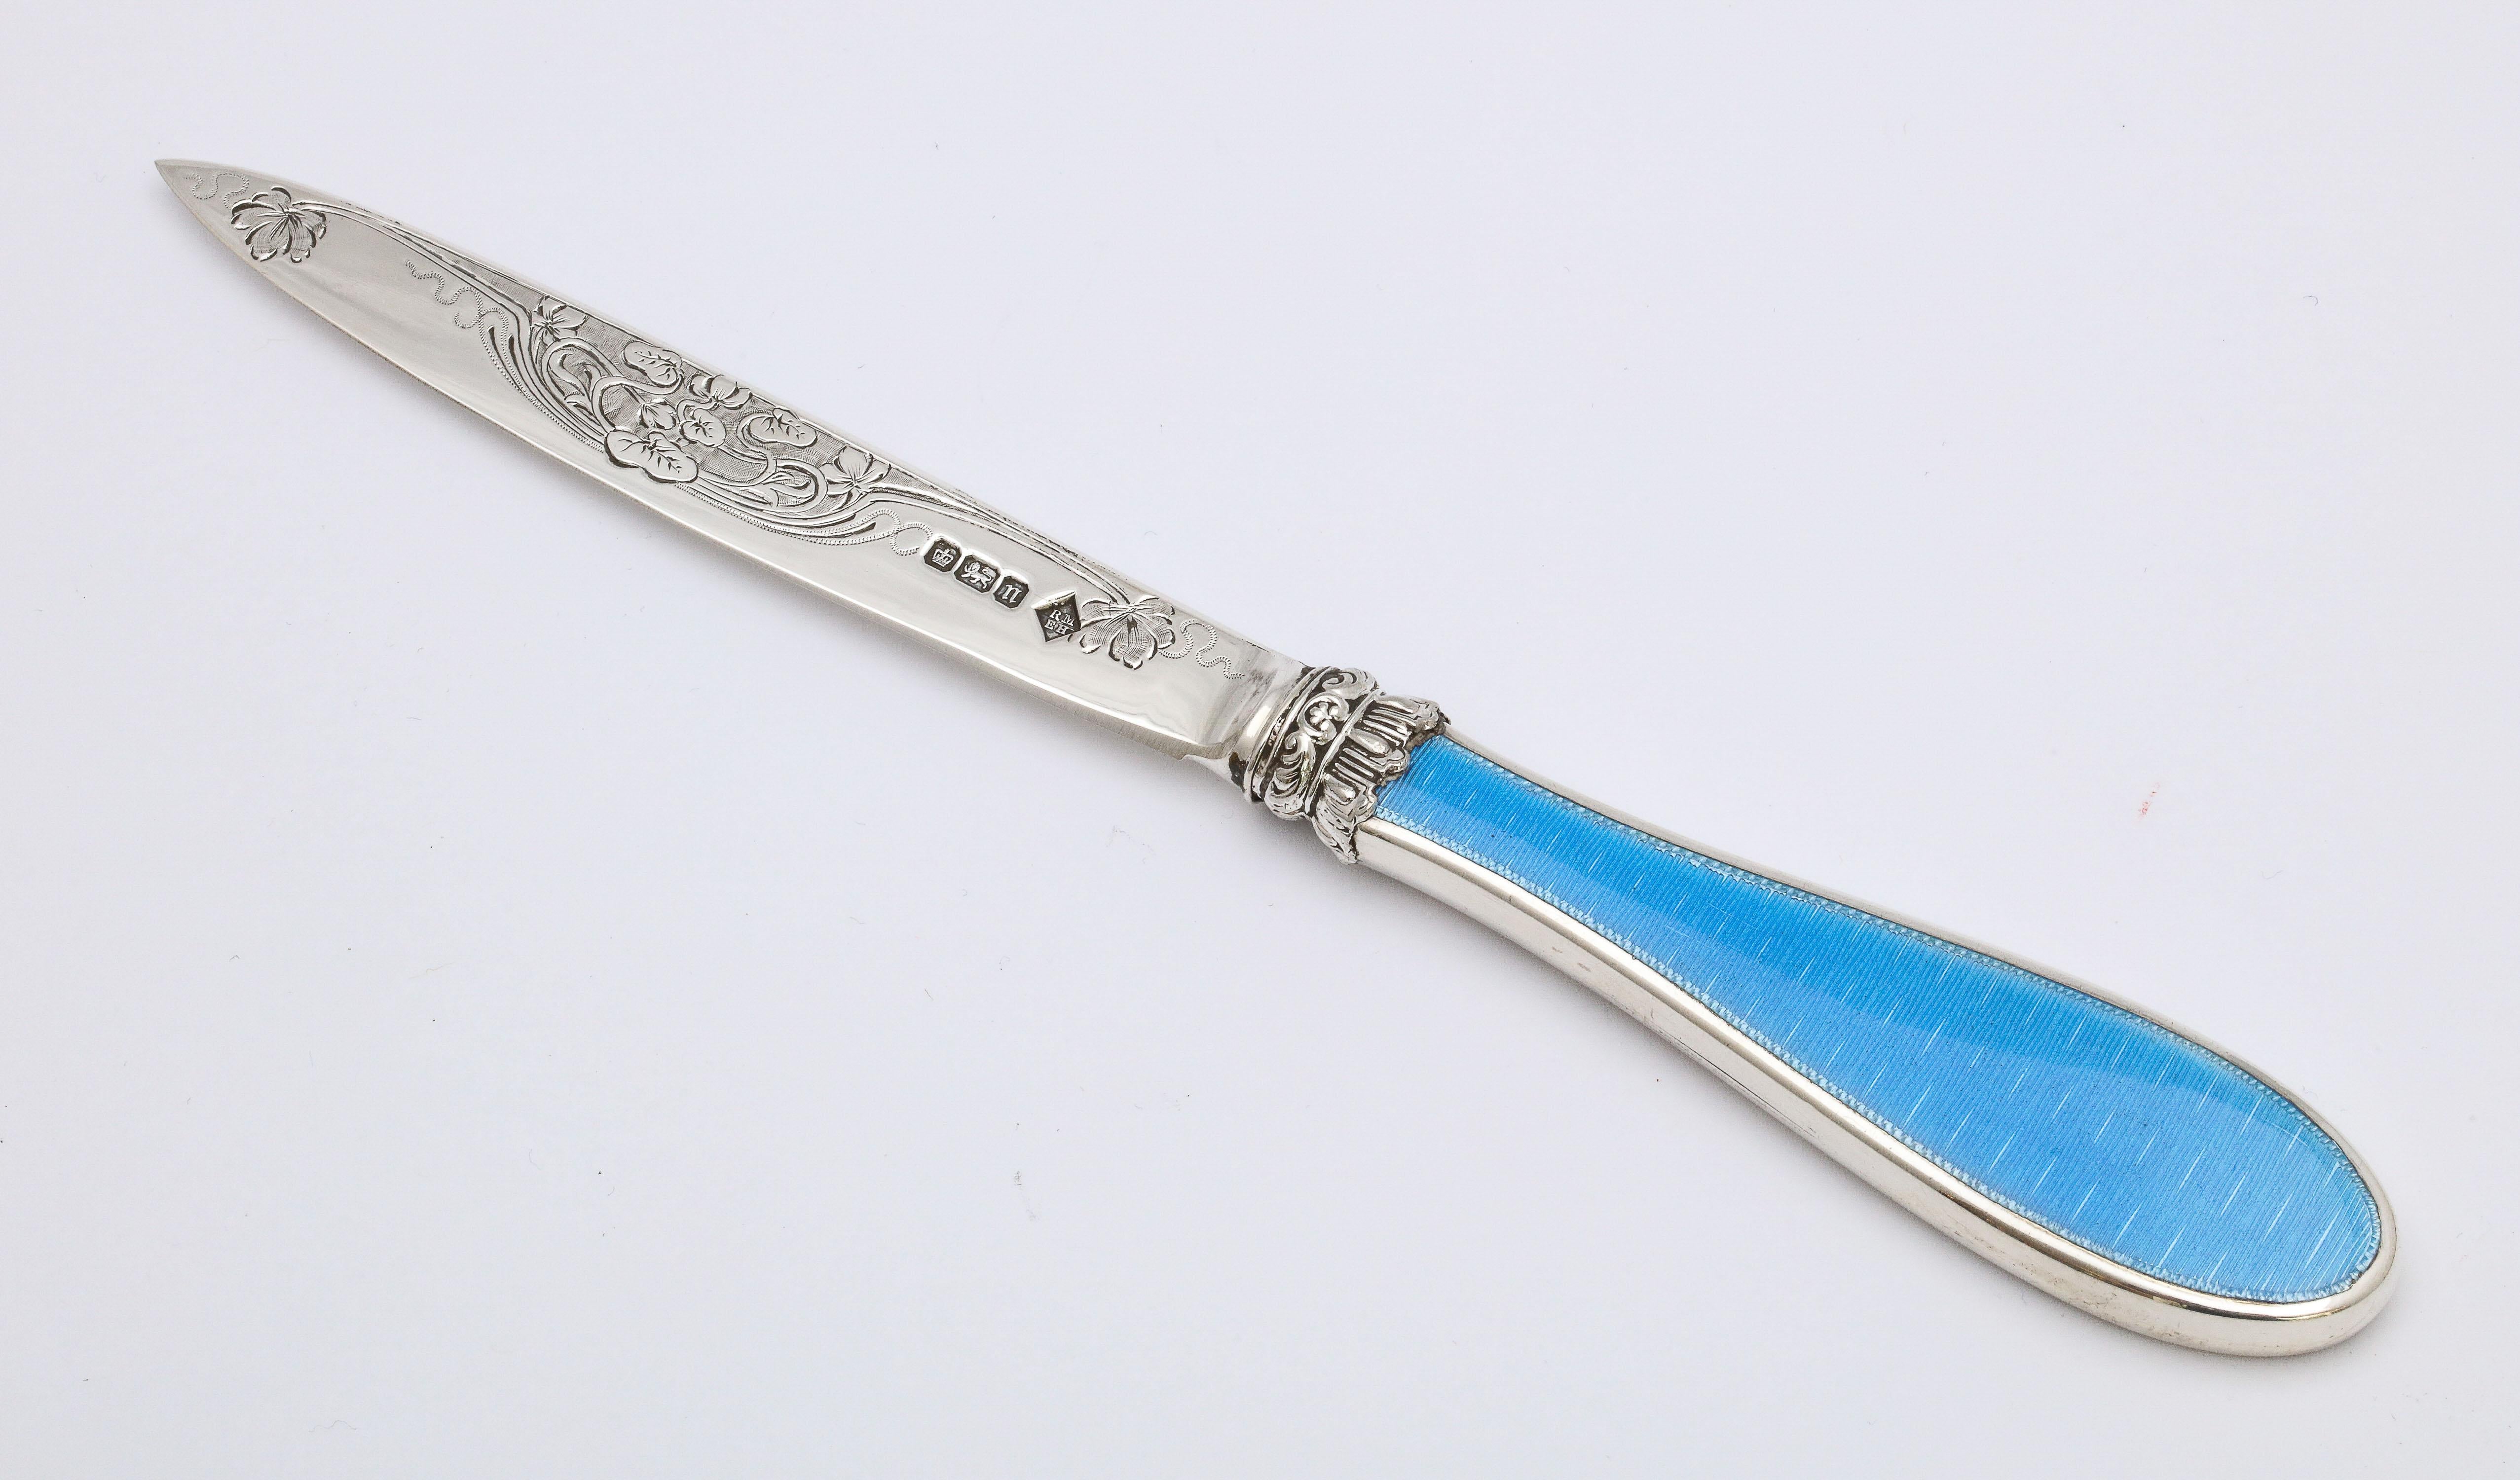 Edwardian, sterling silver letter opener/paper knife with blue guilloche enamel handle, Sheffield, England, 1905, Martin and Hall - Makers. Measures 8 inches long x 1 inch deep (at deepest point) x 1/2 inch high (at highest point) when lying flat.